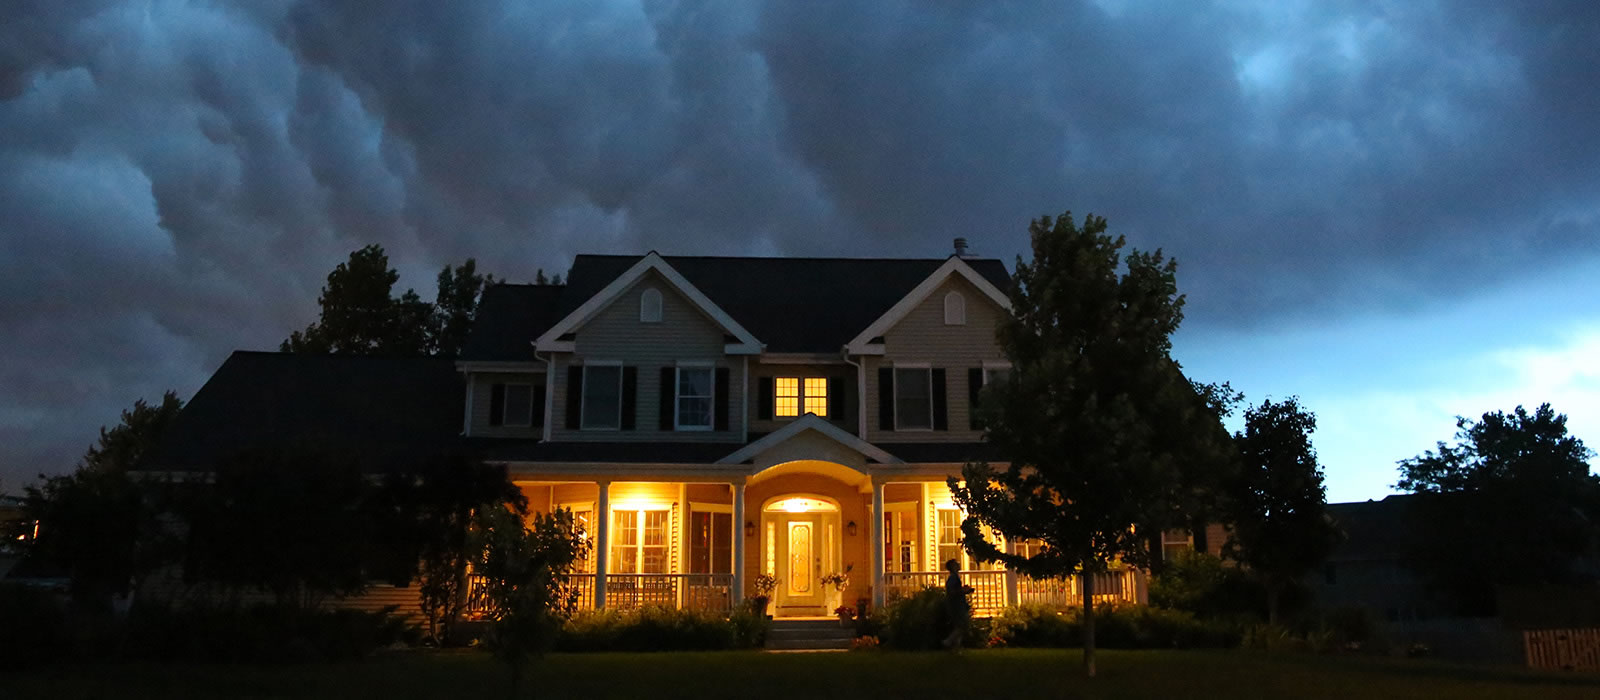 Image of a house at night, in a lightning storm, with its power still on